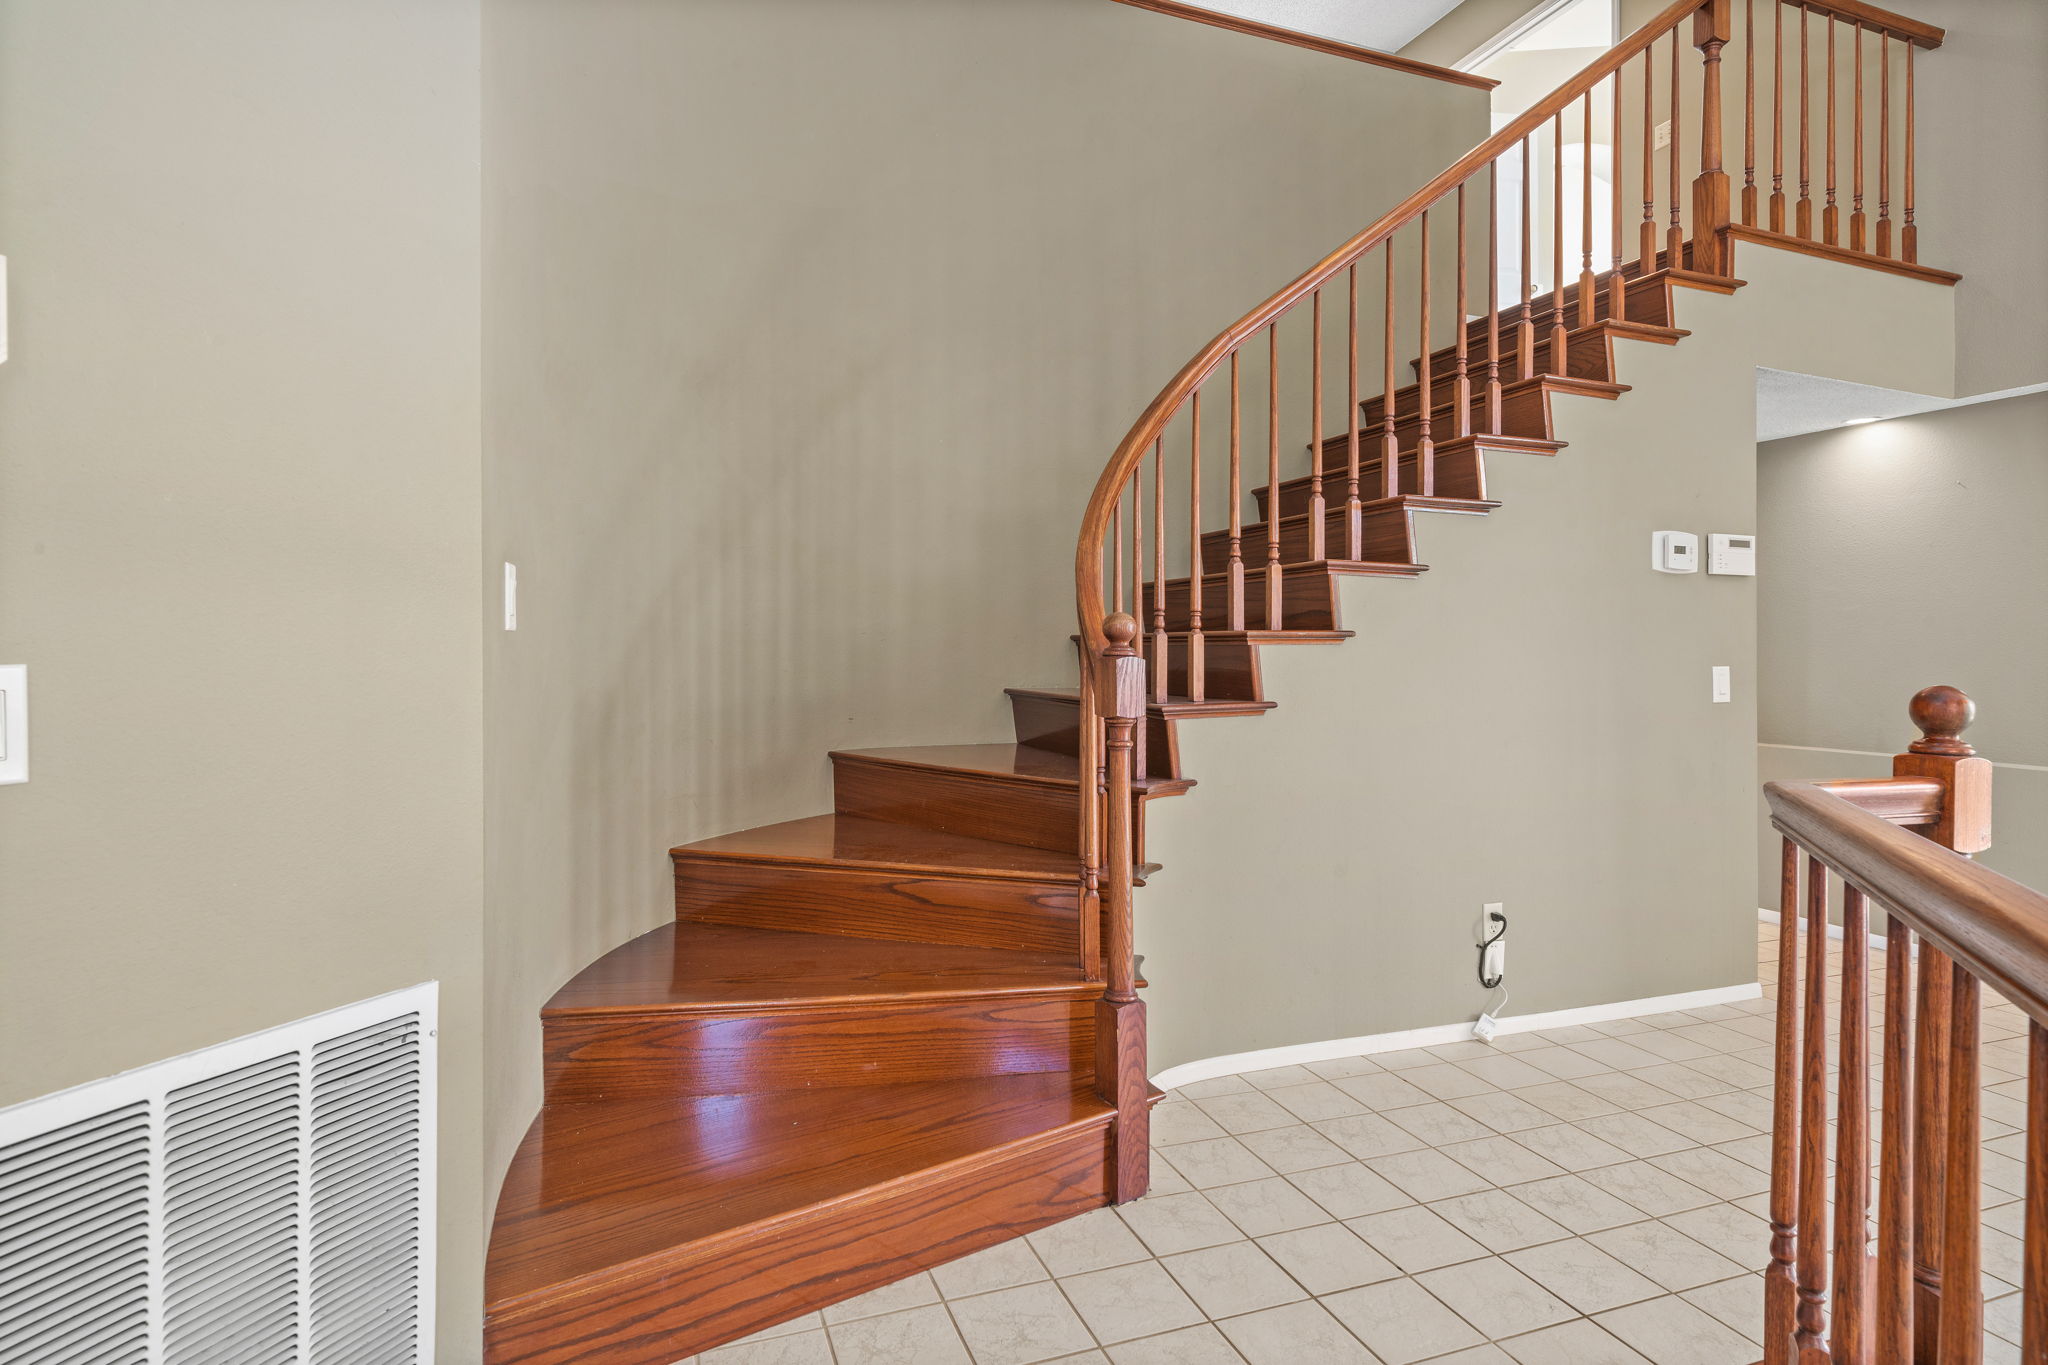 Elegant Curved Staircase